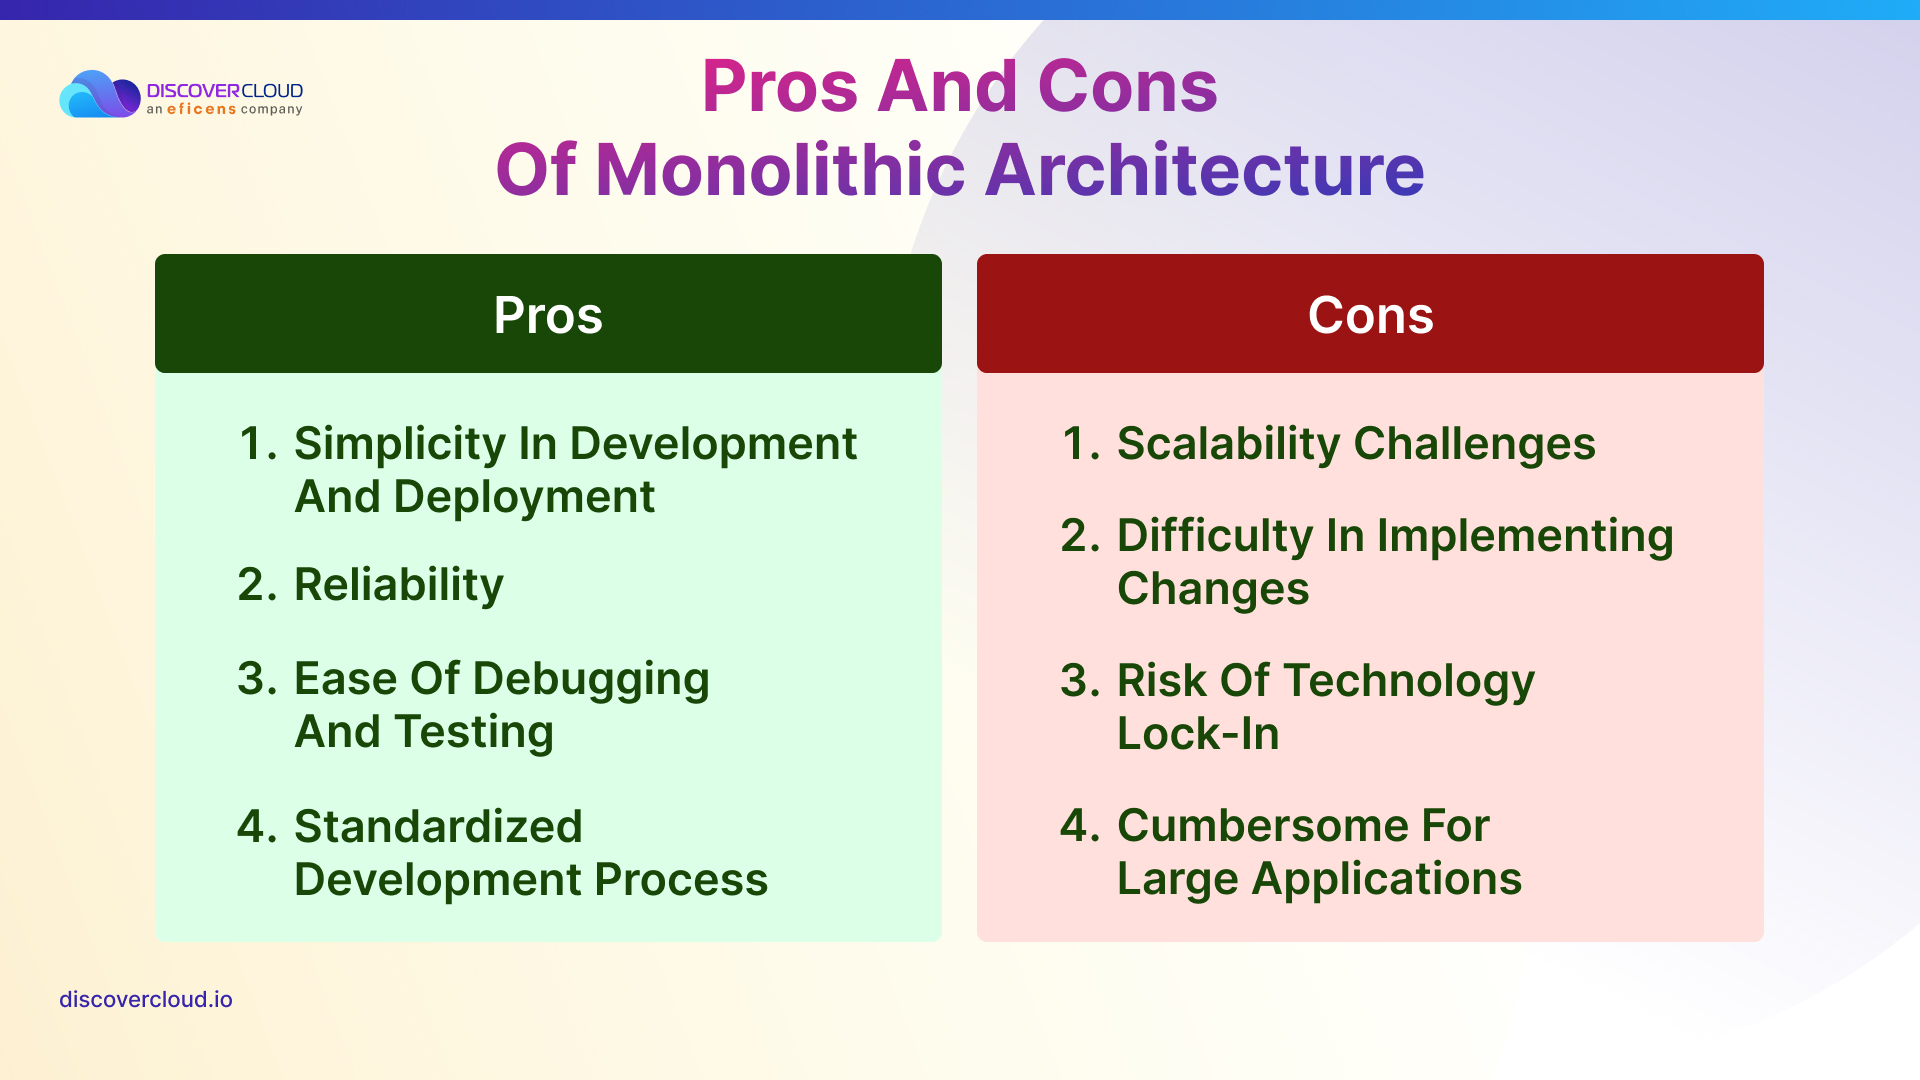 Pros and Cons of Monolithic Architecture